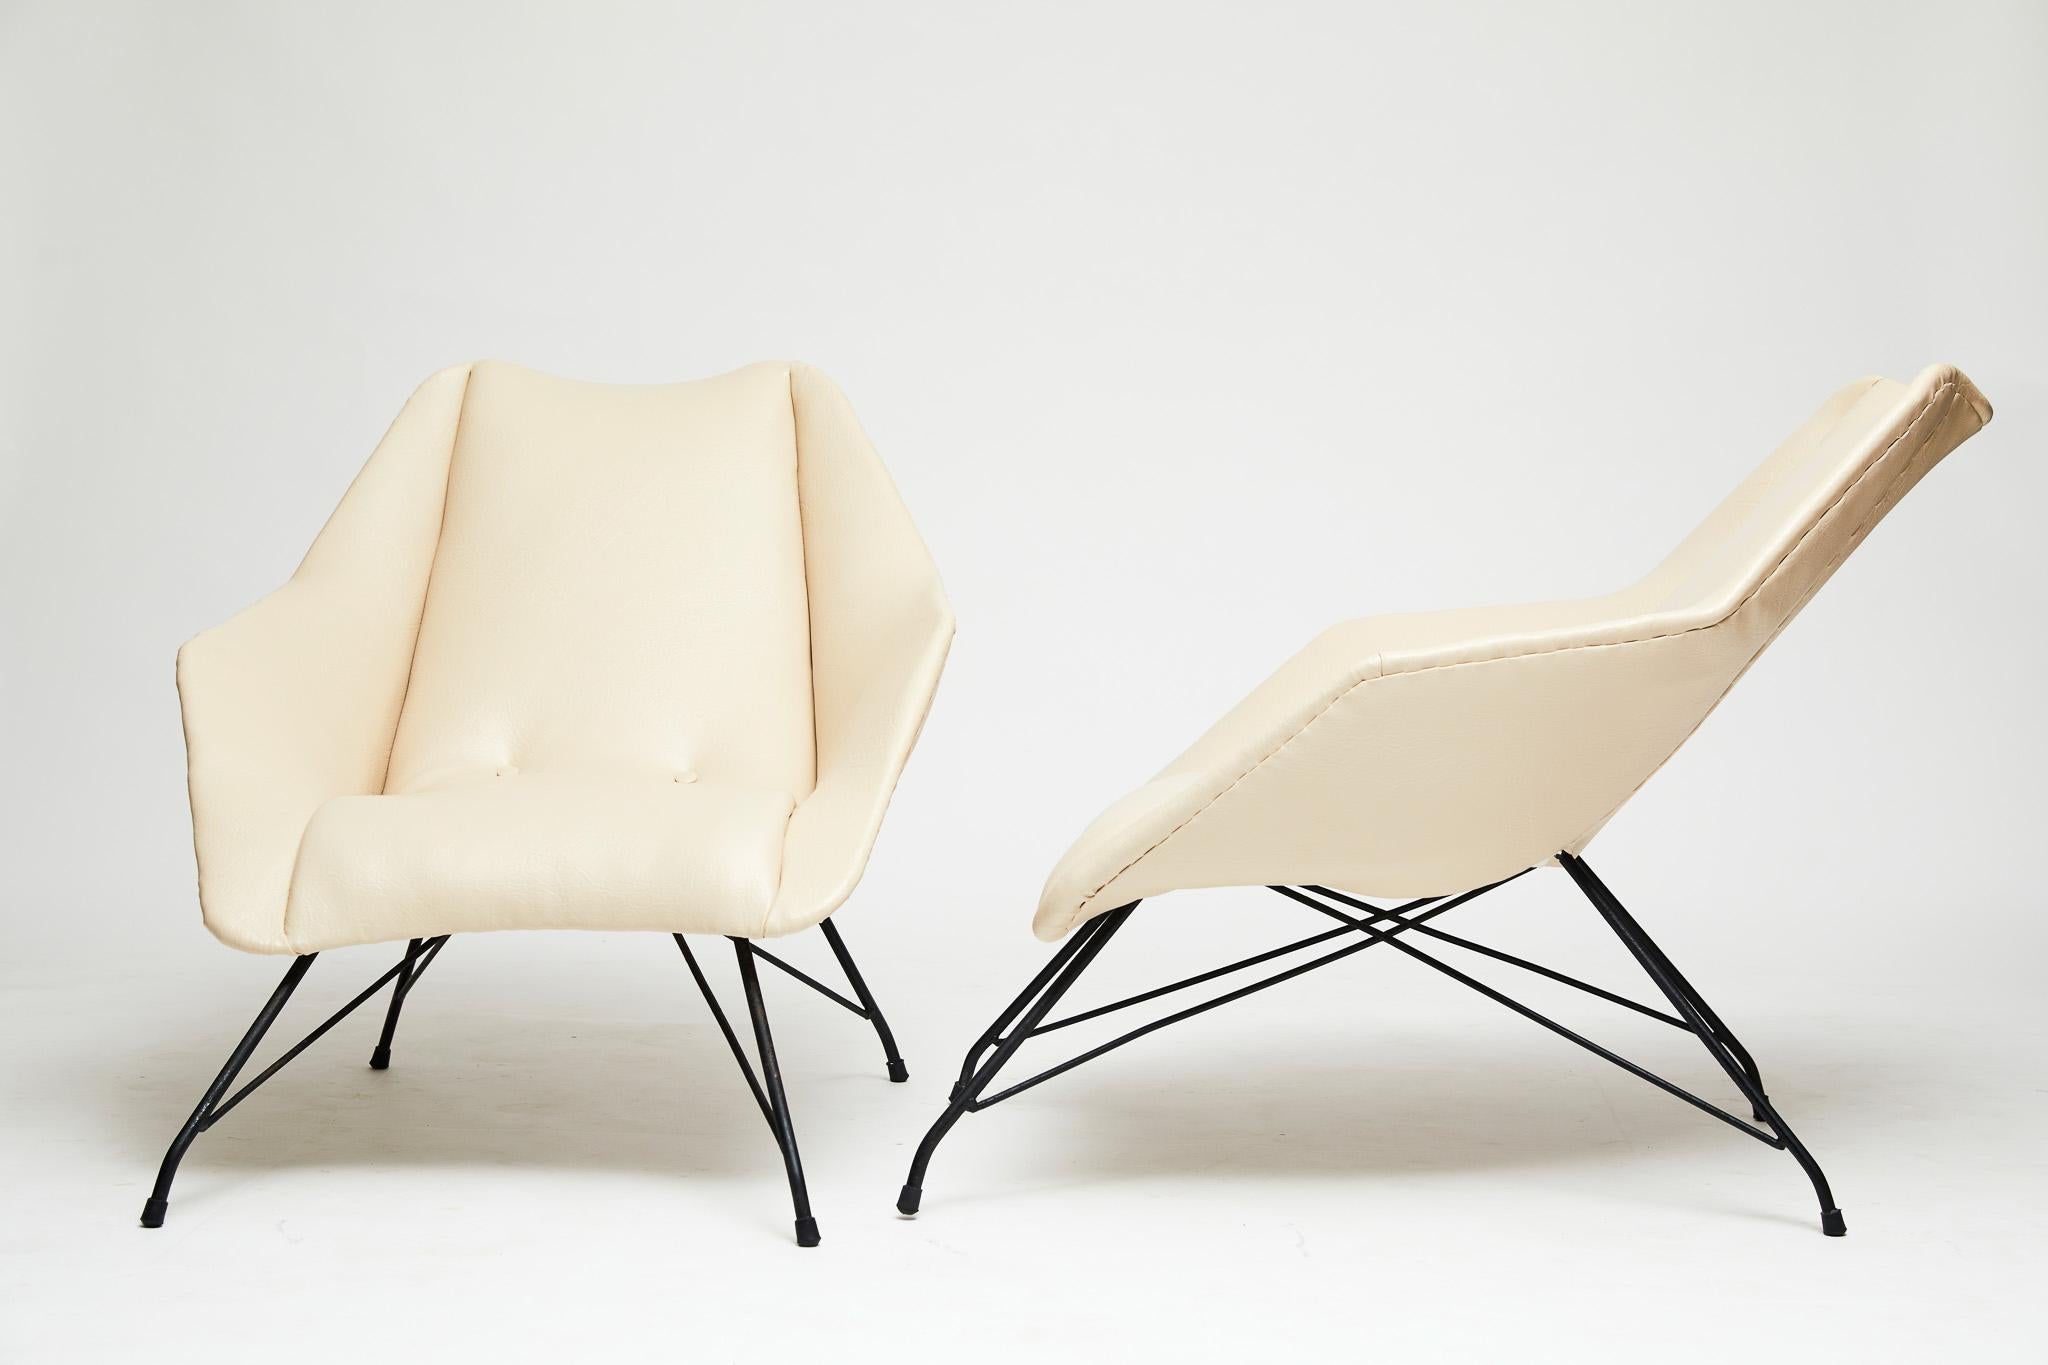 Hand-Painted Midcentury Armchairs in White Leather & Iron Base by Carlo Hauner, 1955, Brazil For Sale